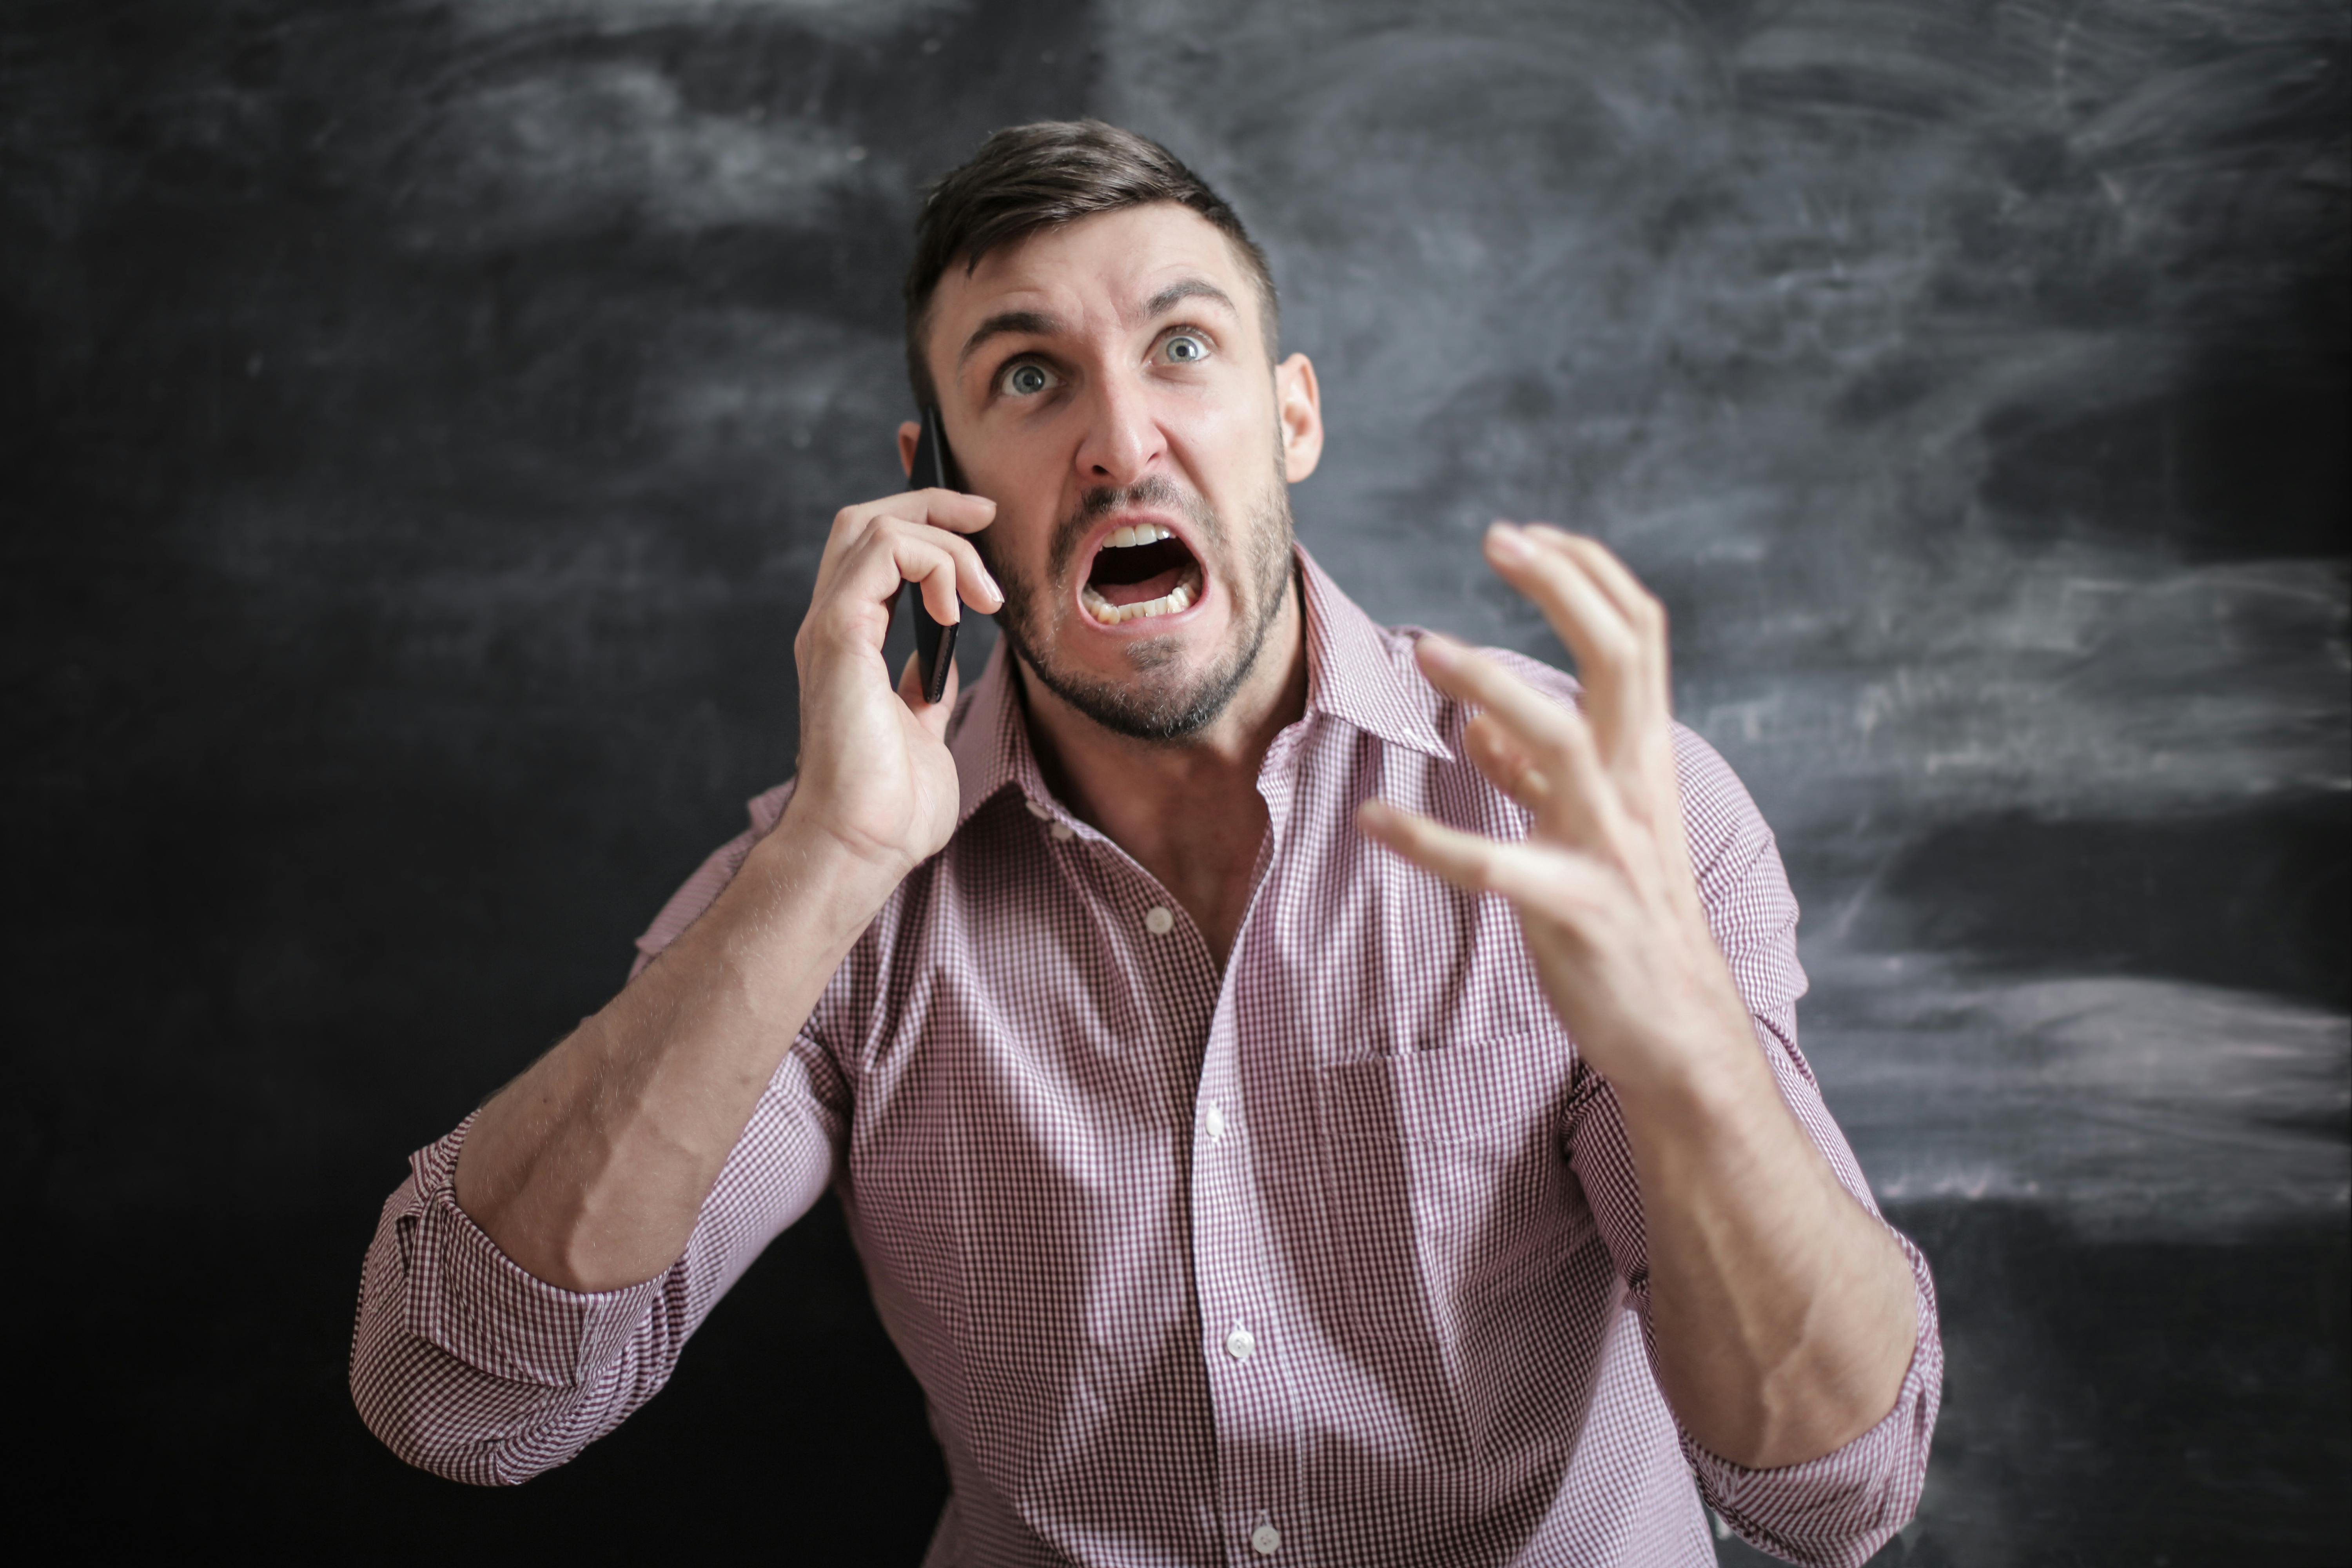 An angry man shouting while on the phone | Source: Pexels